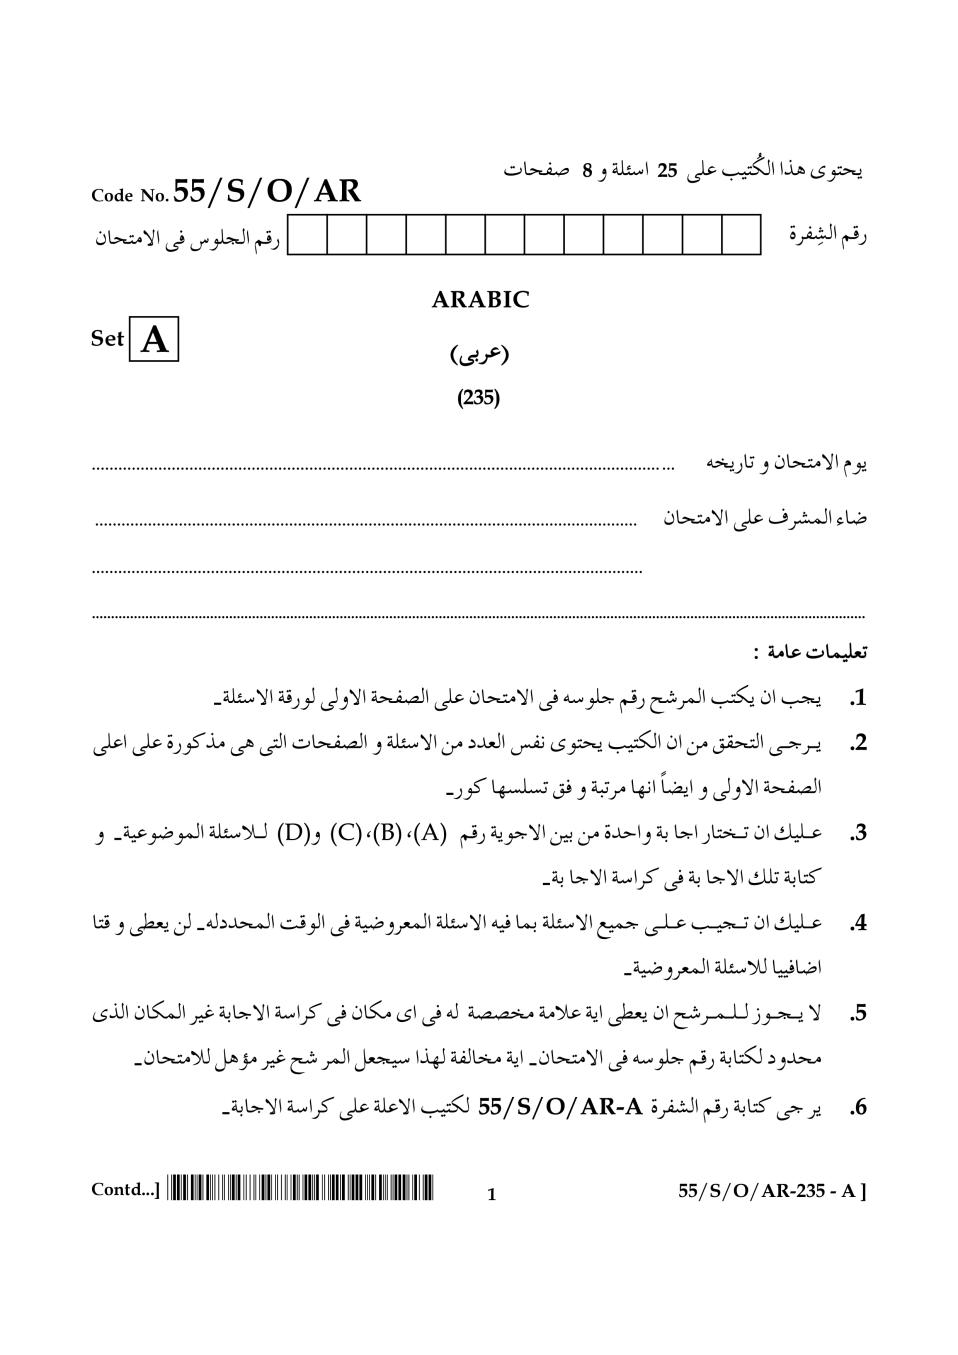 NIOS Class 10 Question Paper Oct 2017 - Arabic - Page 1